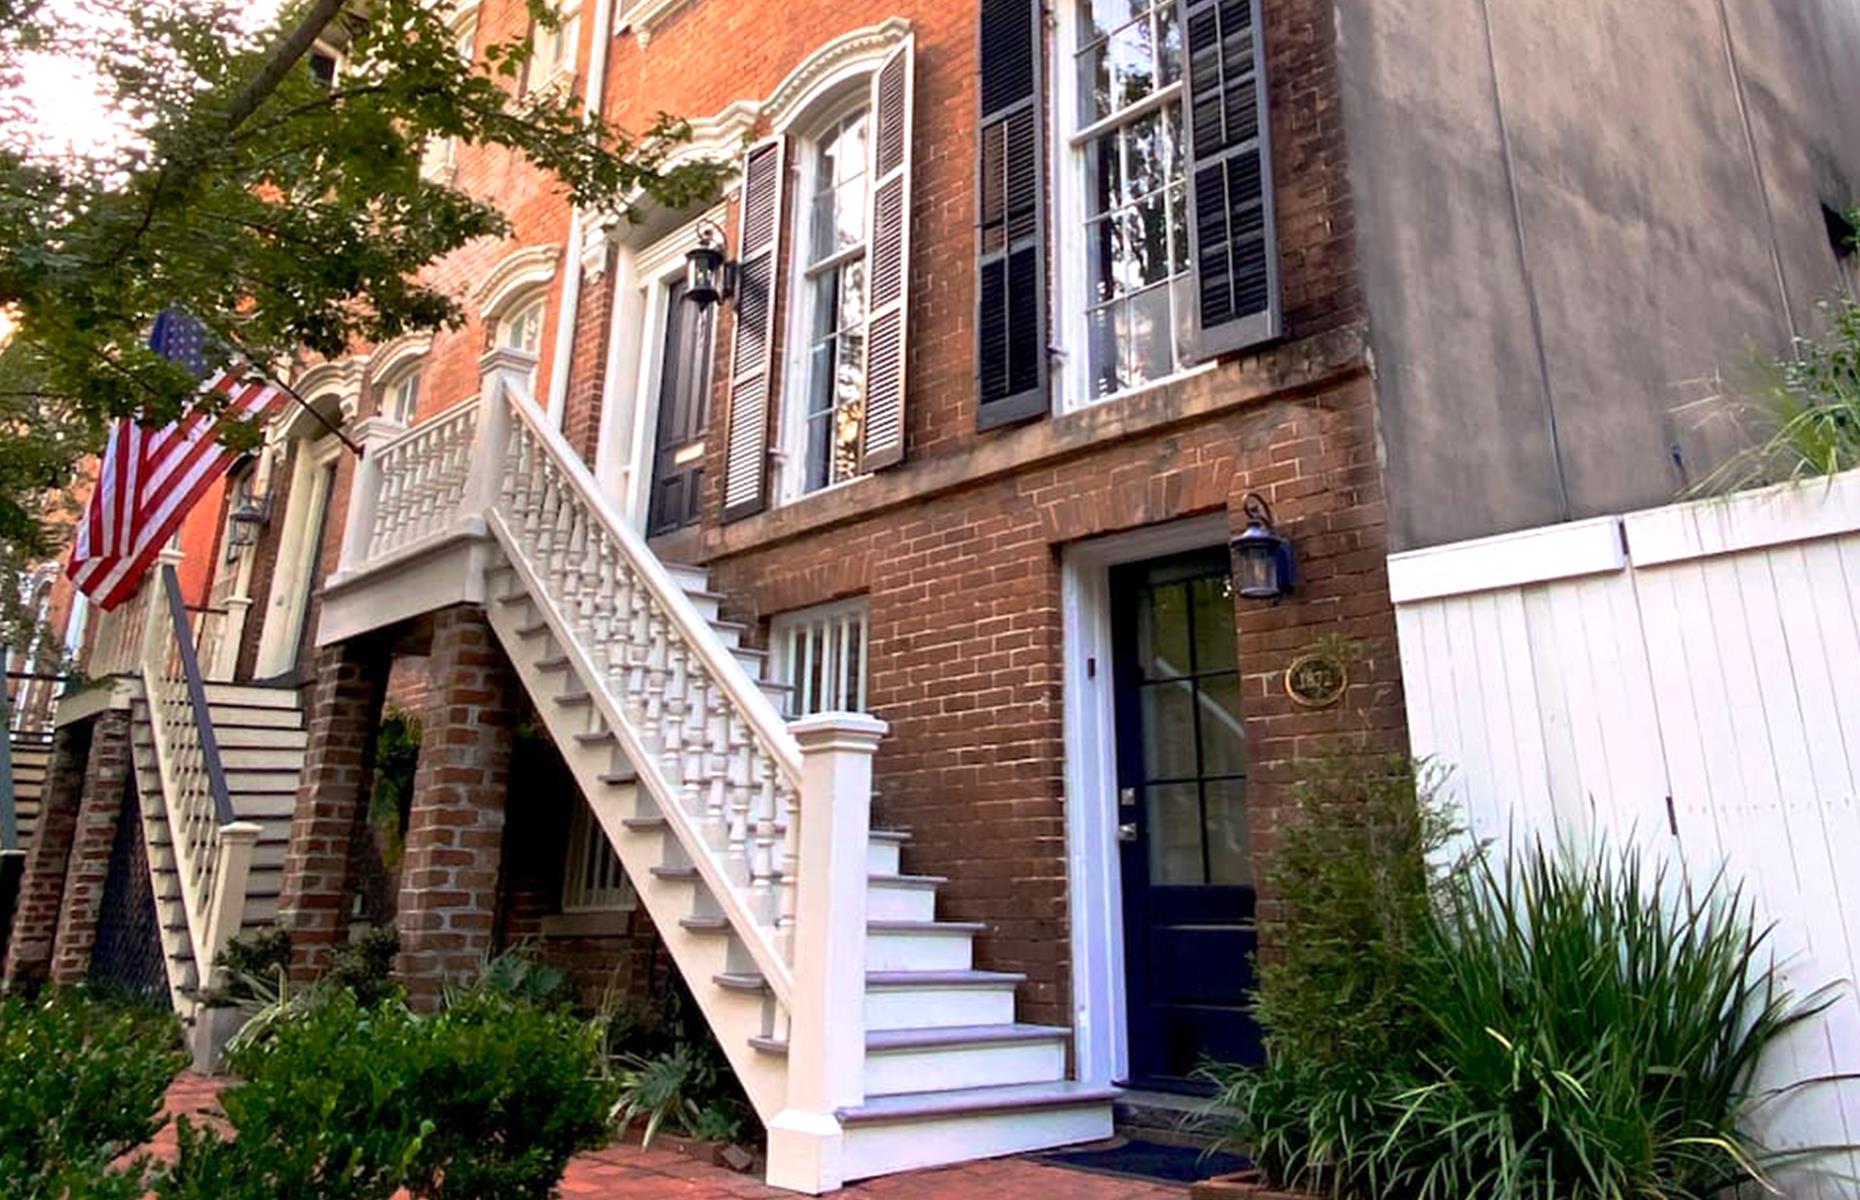 <p>It doesn't get much more Savannah than this. Many elegant townhouses line the city's bricked, Spanish-moss draped streets, and <a href="https://www.airbnb.co.uk/rooms/22412416?check_in=2020-12-14&check_out=2020-12-16&source_impression_id=p3_1605520605_DkW13pHnpULsR67U">this super chic apartment</a> is tucked into one of them. Dating to the 1870s, it's right in the Historic District, a stone's thrown from the famous Forsyth Park, and boasts an idyllic courtyard with a firepit, plus bare brick walls and fireplaces. It's possible to stay here for $88 per night. </p>